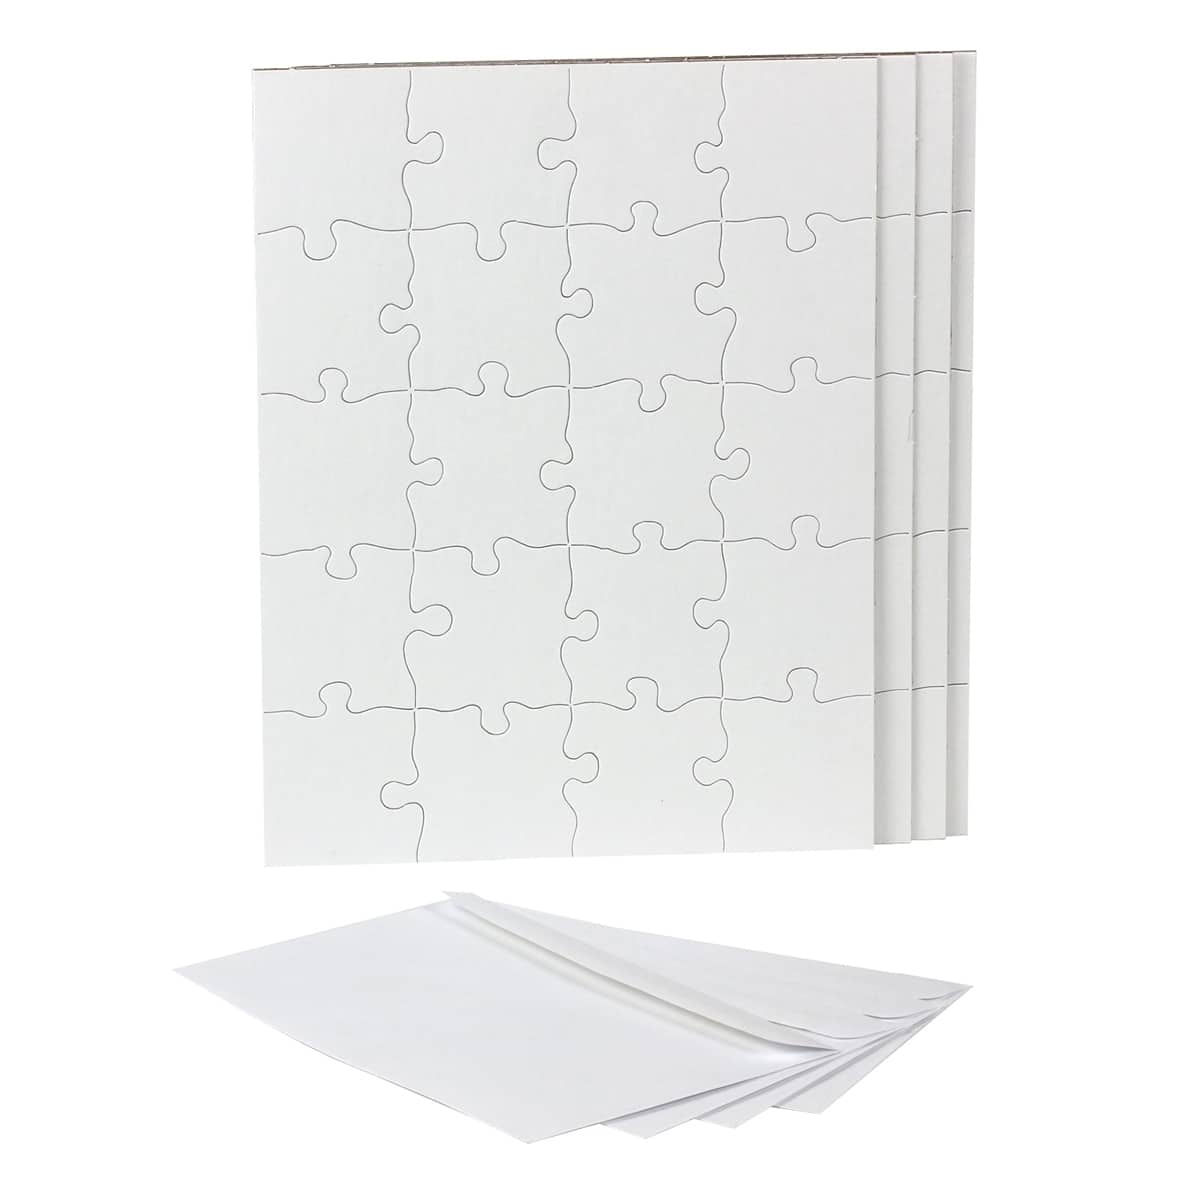 Inovart 2744 5 .5 x 8 in. Puzzle-It Blank Puzzles with Envelopes